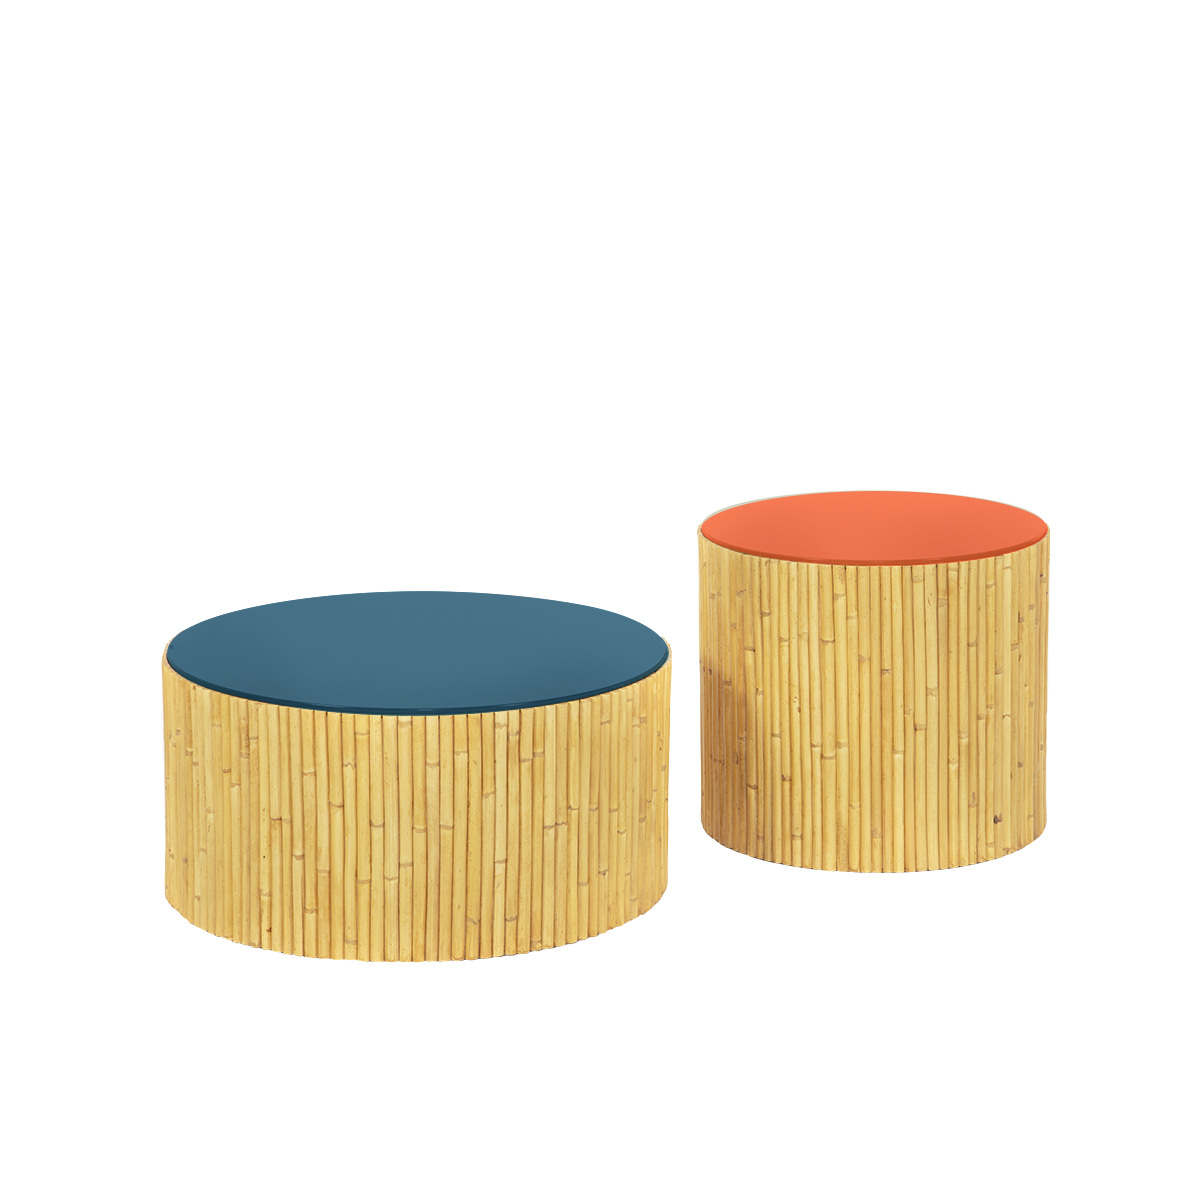 Duo of Coffee Tables Rivera, Natural / Black - ø60 x H30 cm and ø45 x H40 cm - Rattan / Lacquered wood - image 9